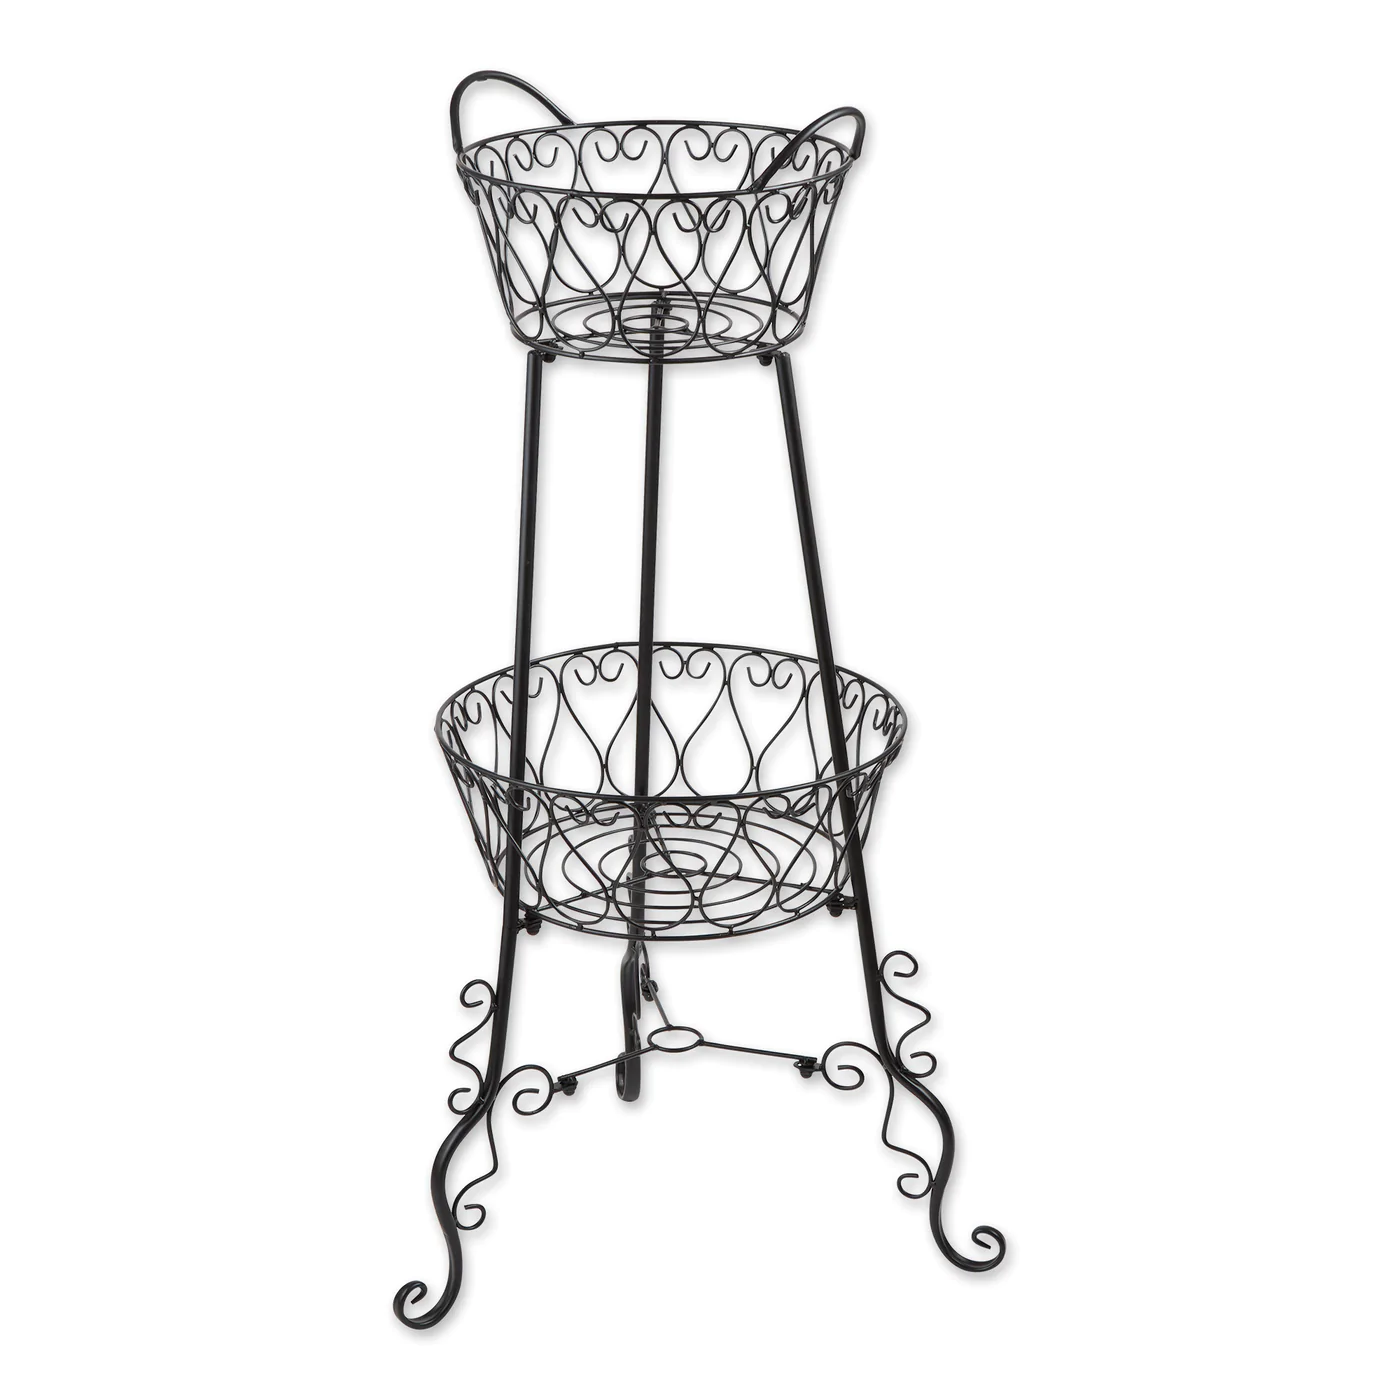 2 Tier Plant Stand - $69.00